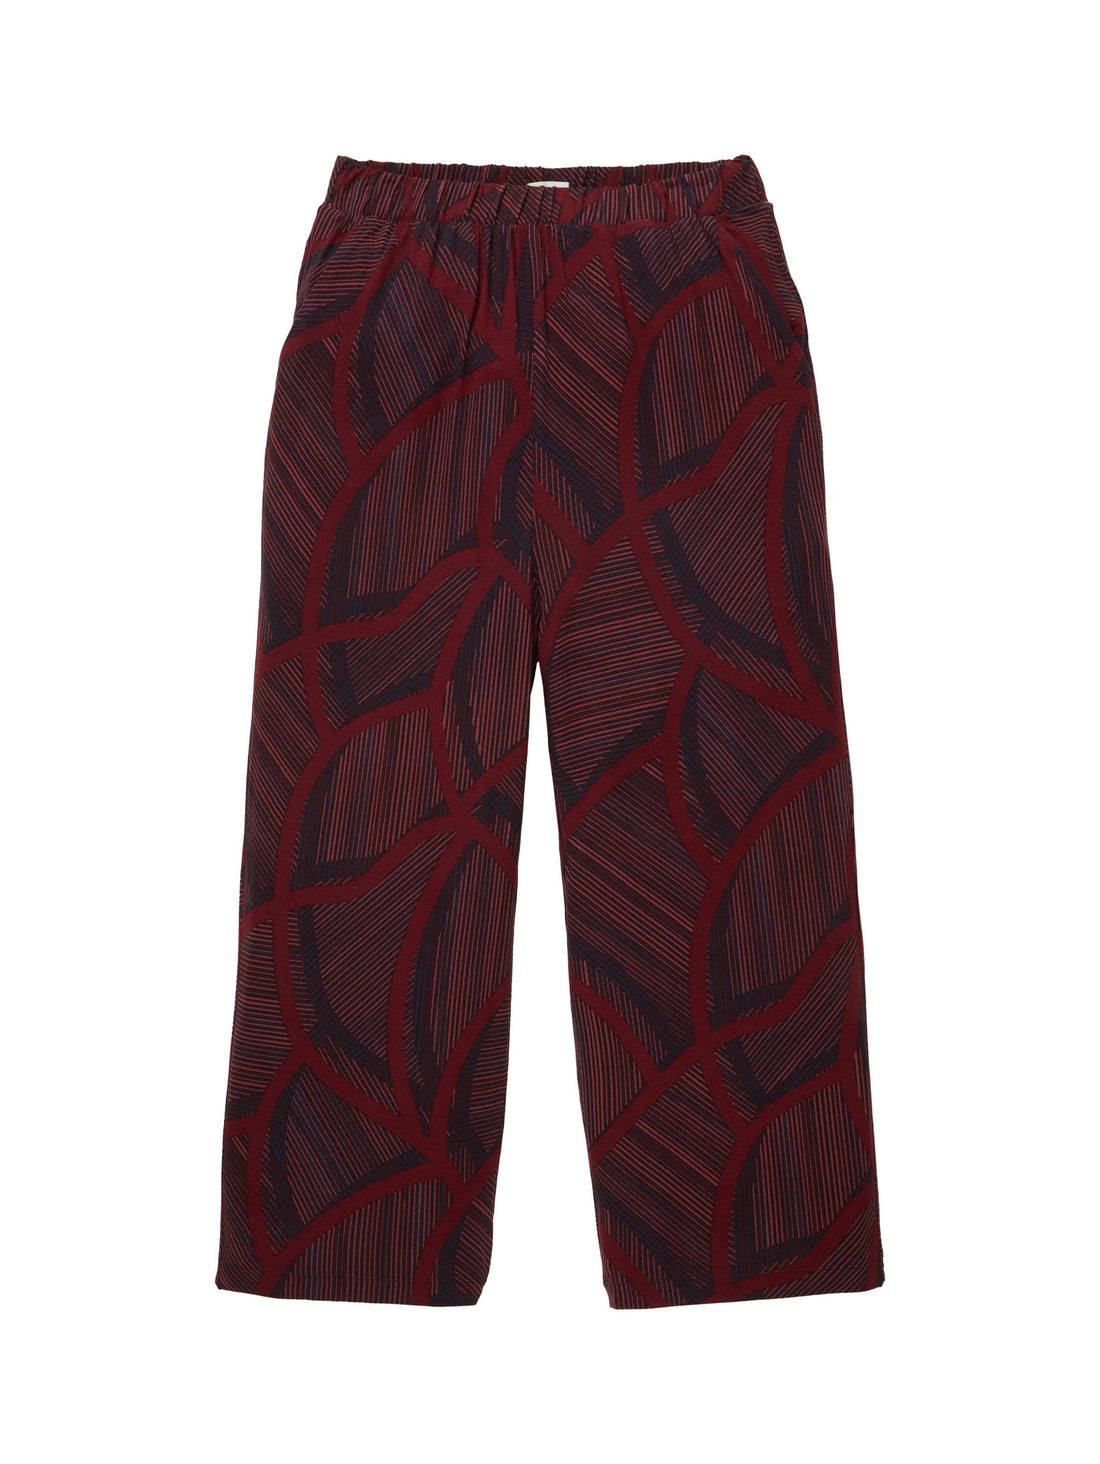 Cropped Printed Slip On Trousers_1039869_32363_01